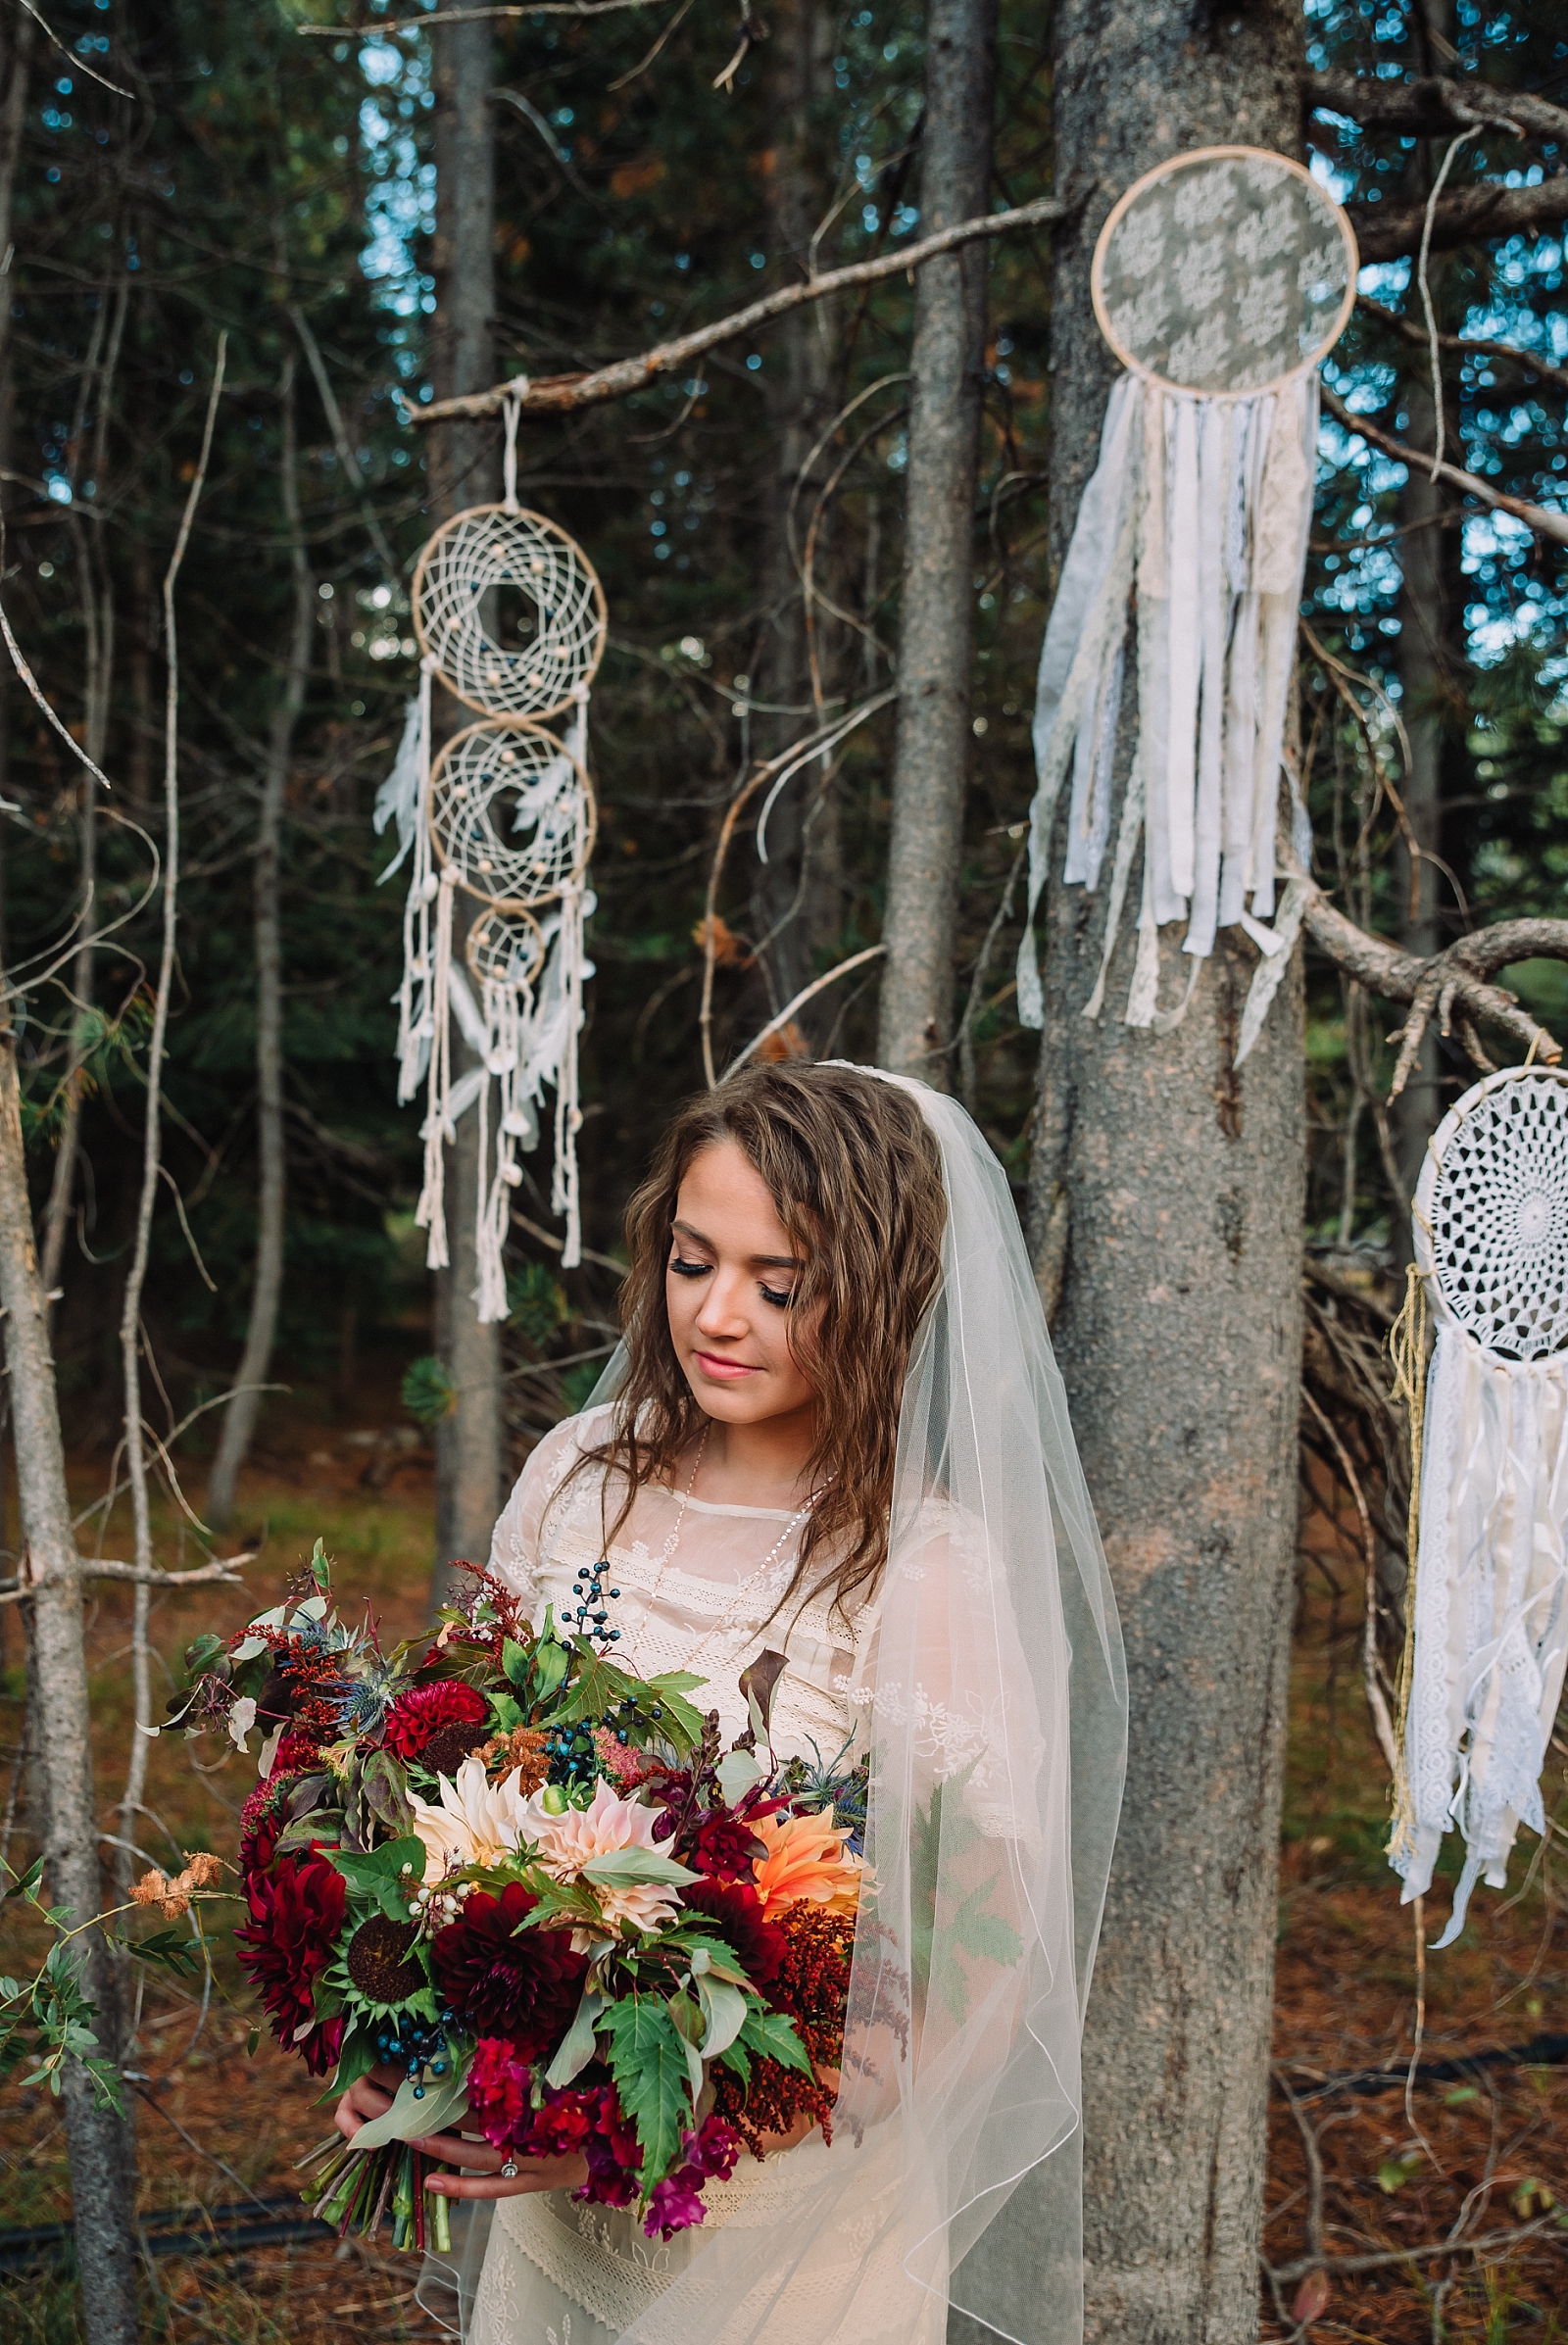 earhty fall elopement in Island park with boho wedding decor in the woods, bride holding an warm bouquet of fall flowers